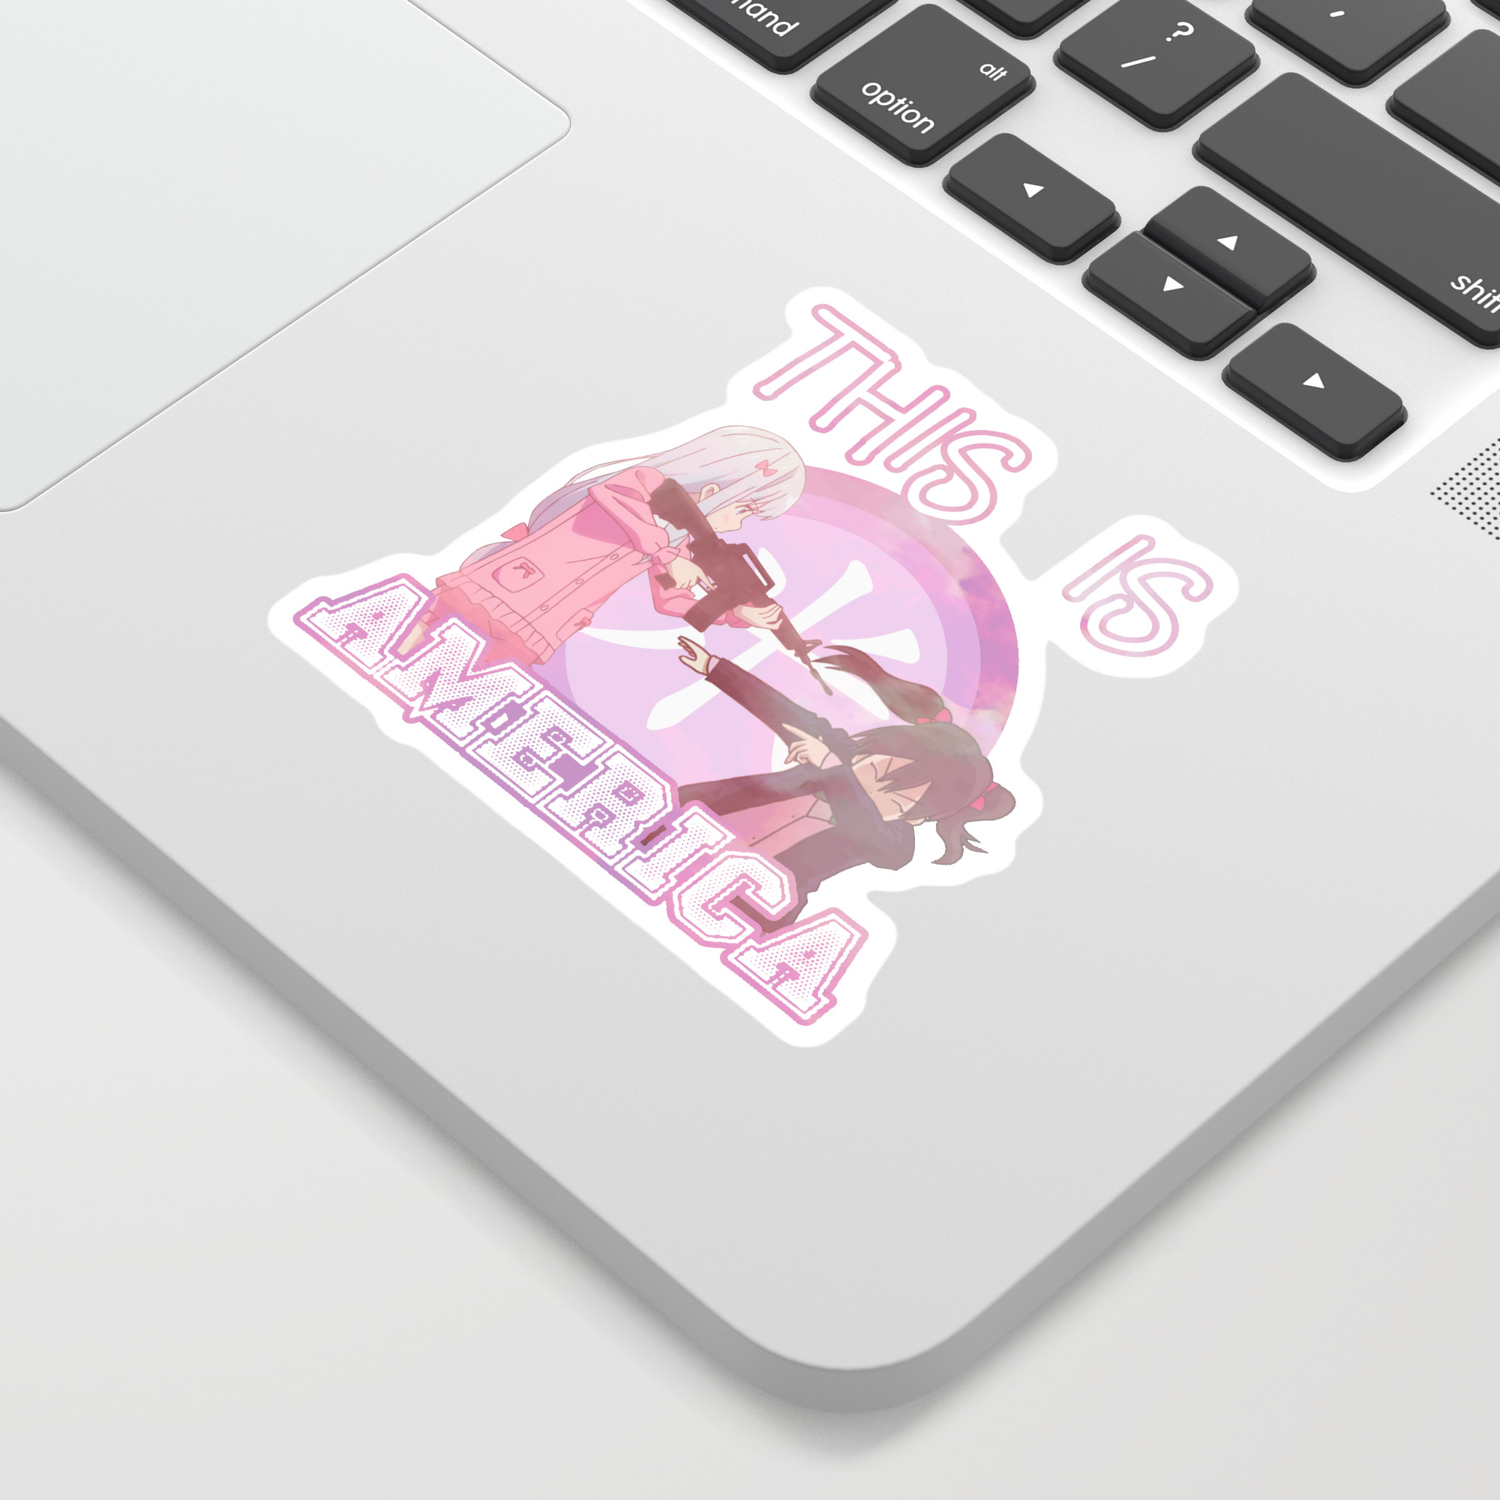 THIS IS AMERICA - FUNNY ANIME JAPANESE MEME AESTHETIC Sticker by Poser_Boy  | Society6